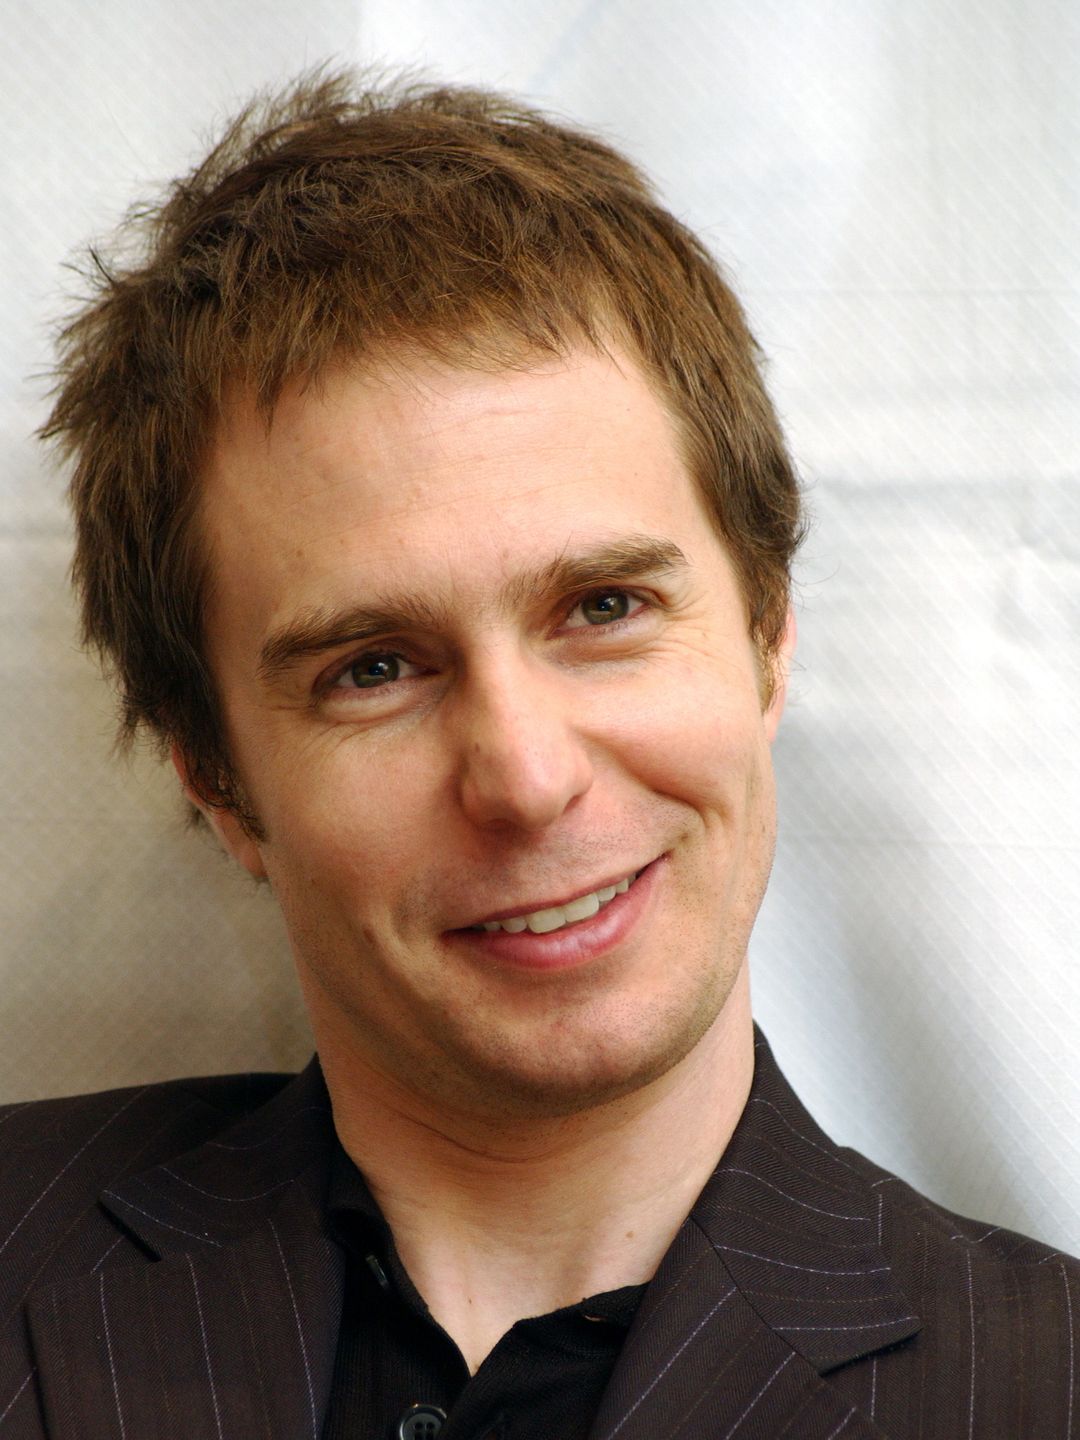 Sam Rockwell who is his father